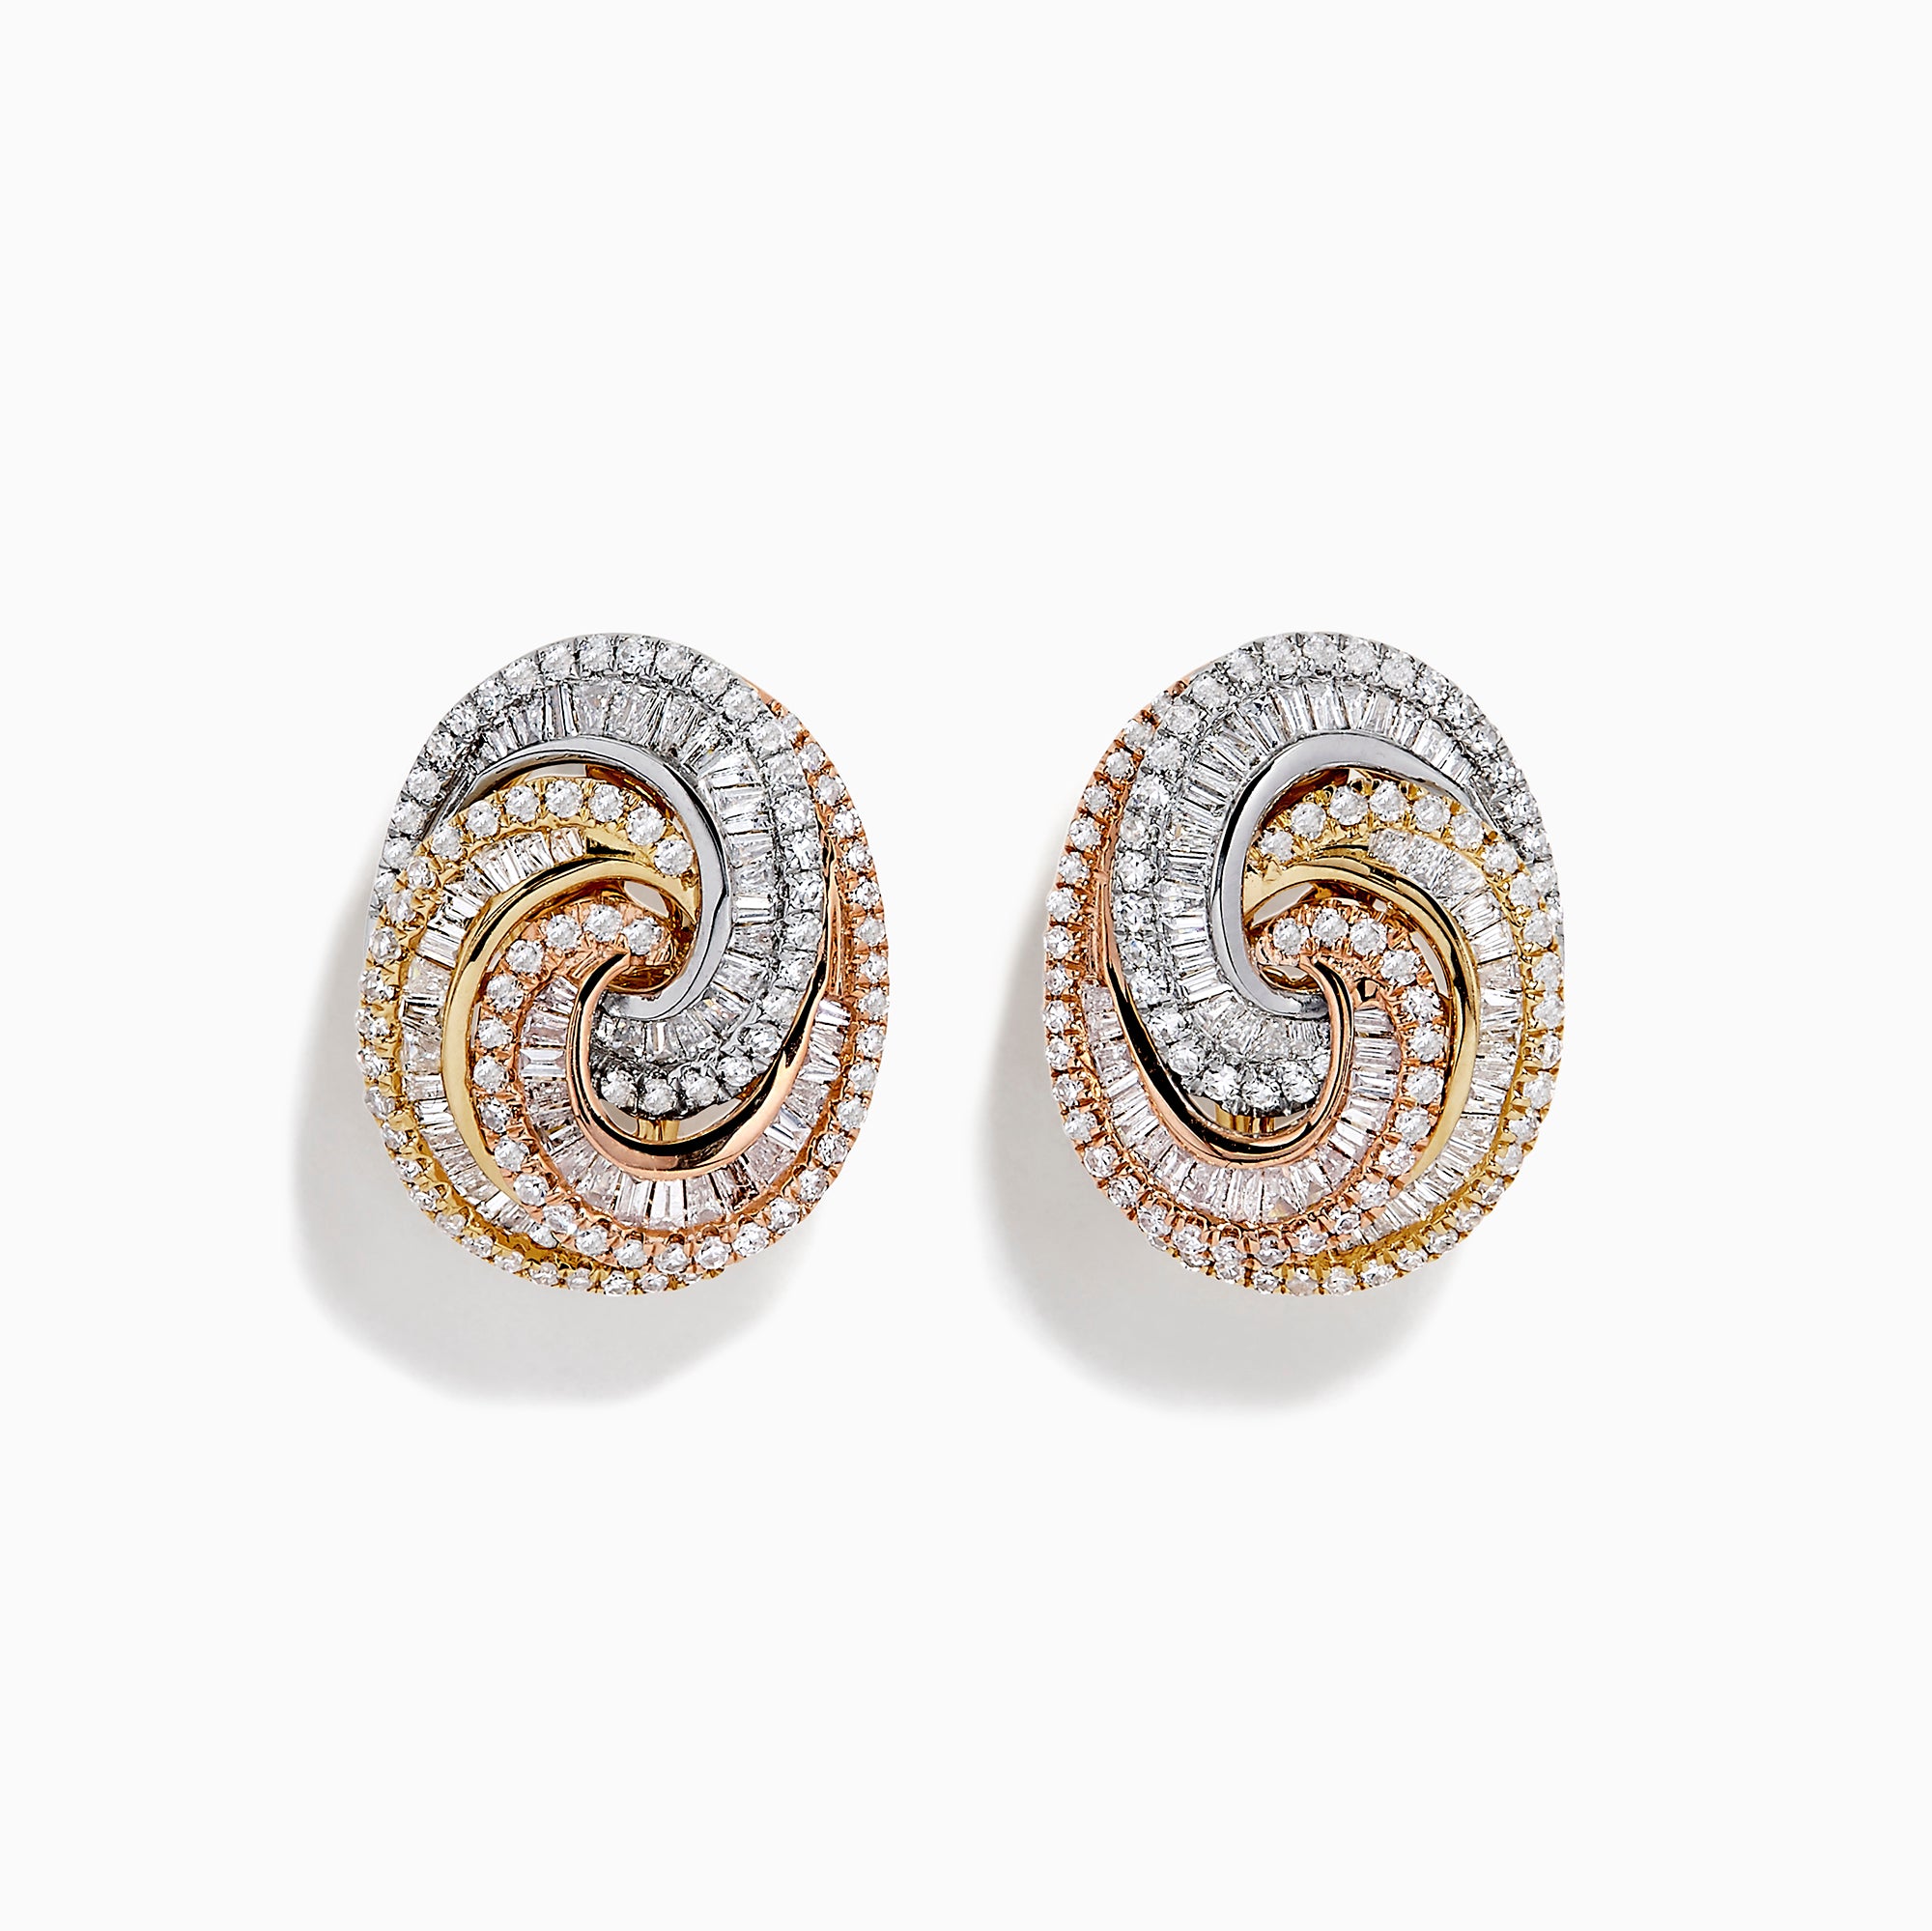 5 Latest Designs Of Party Wear Earrings For Women - Mighzalalarab